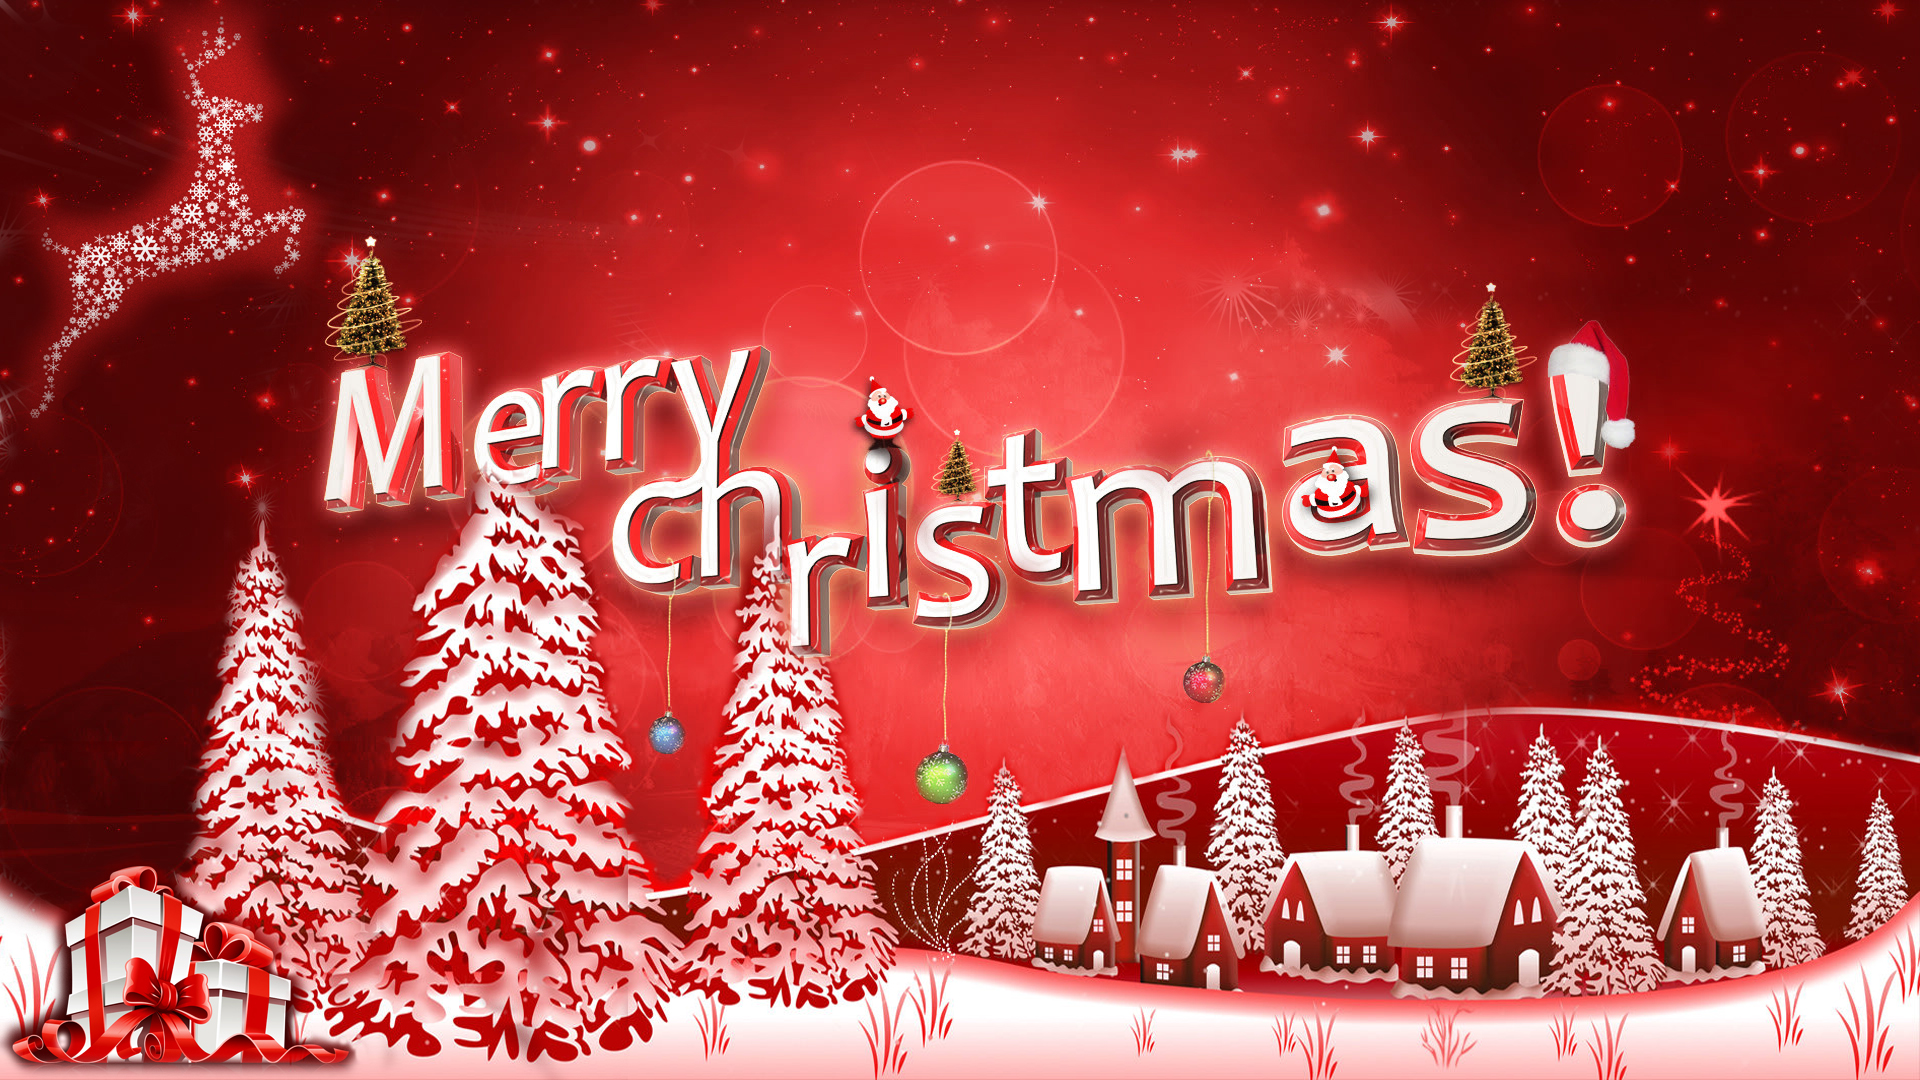 floral hd merry christmas image